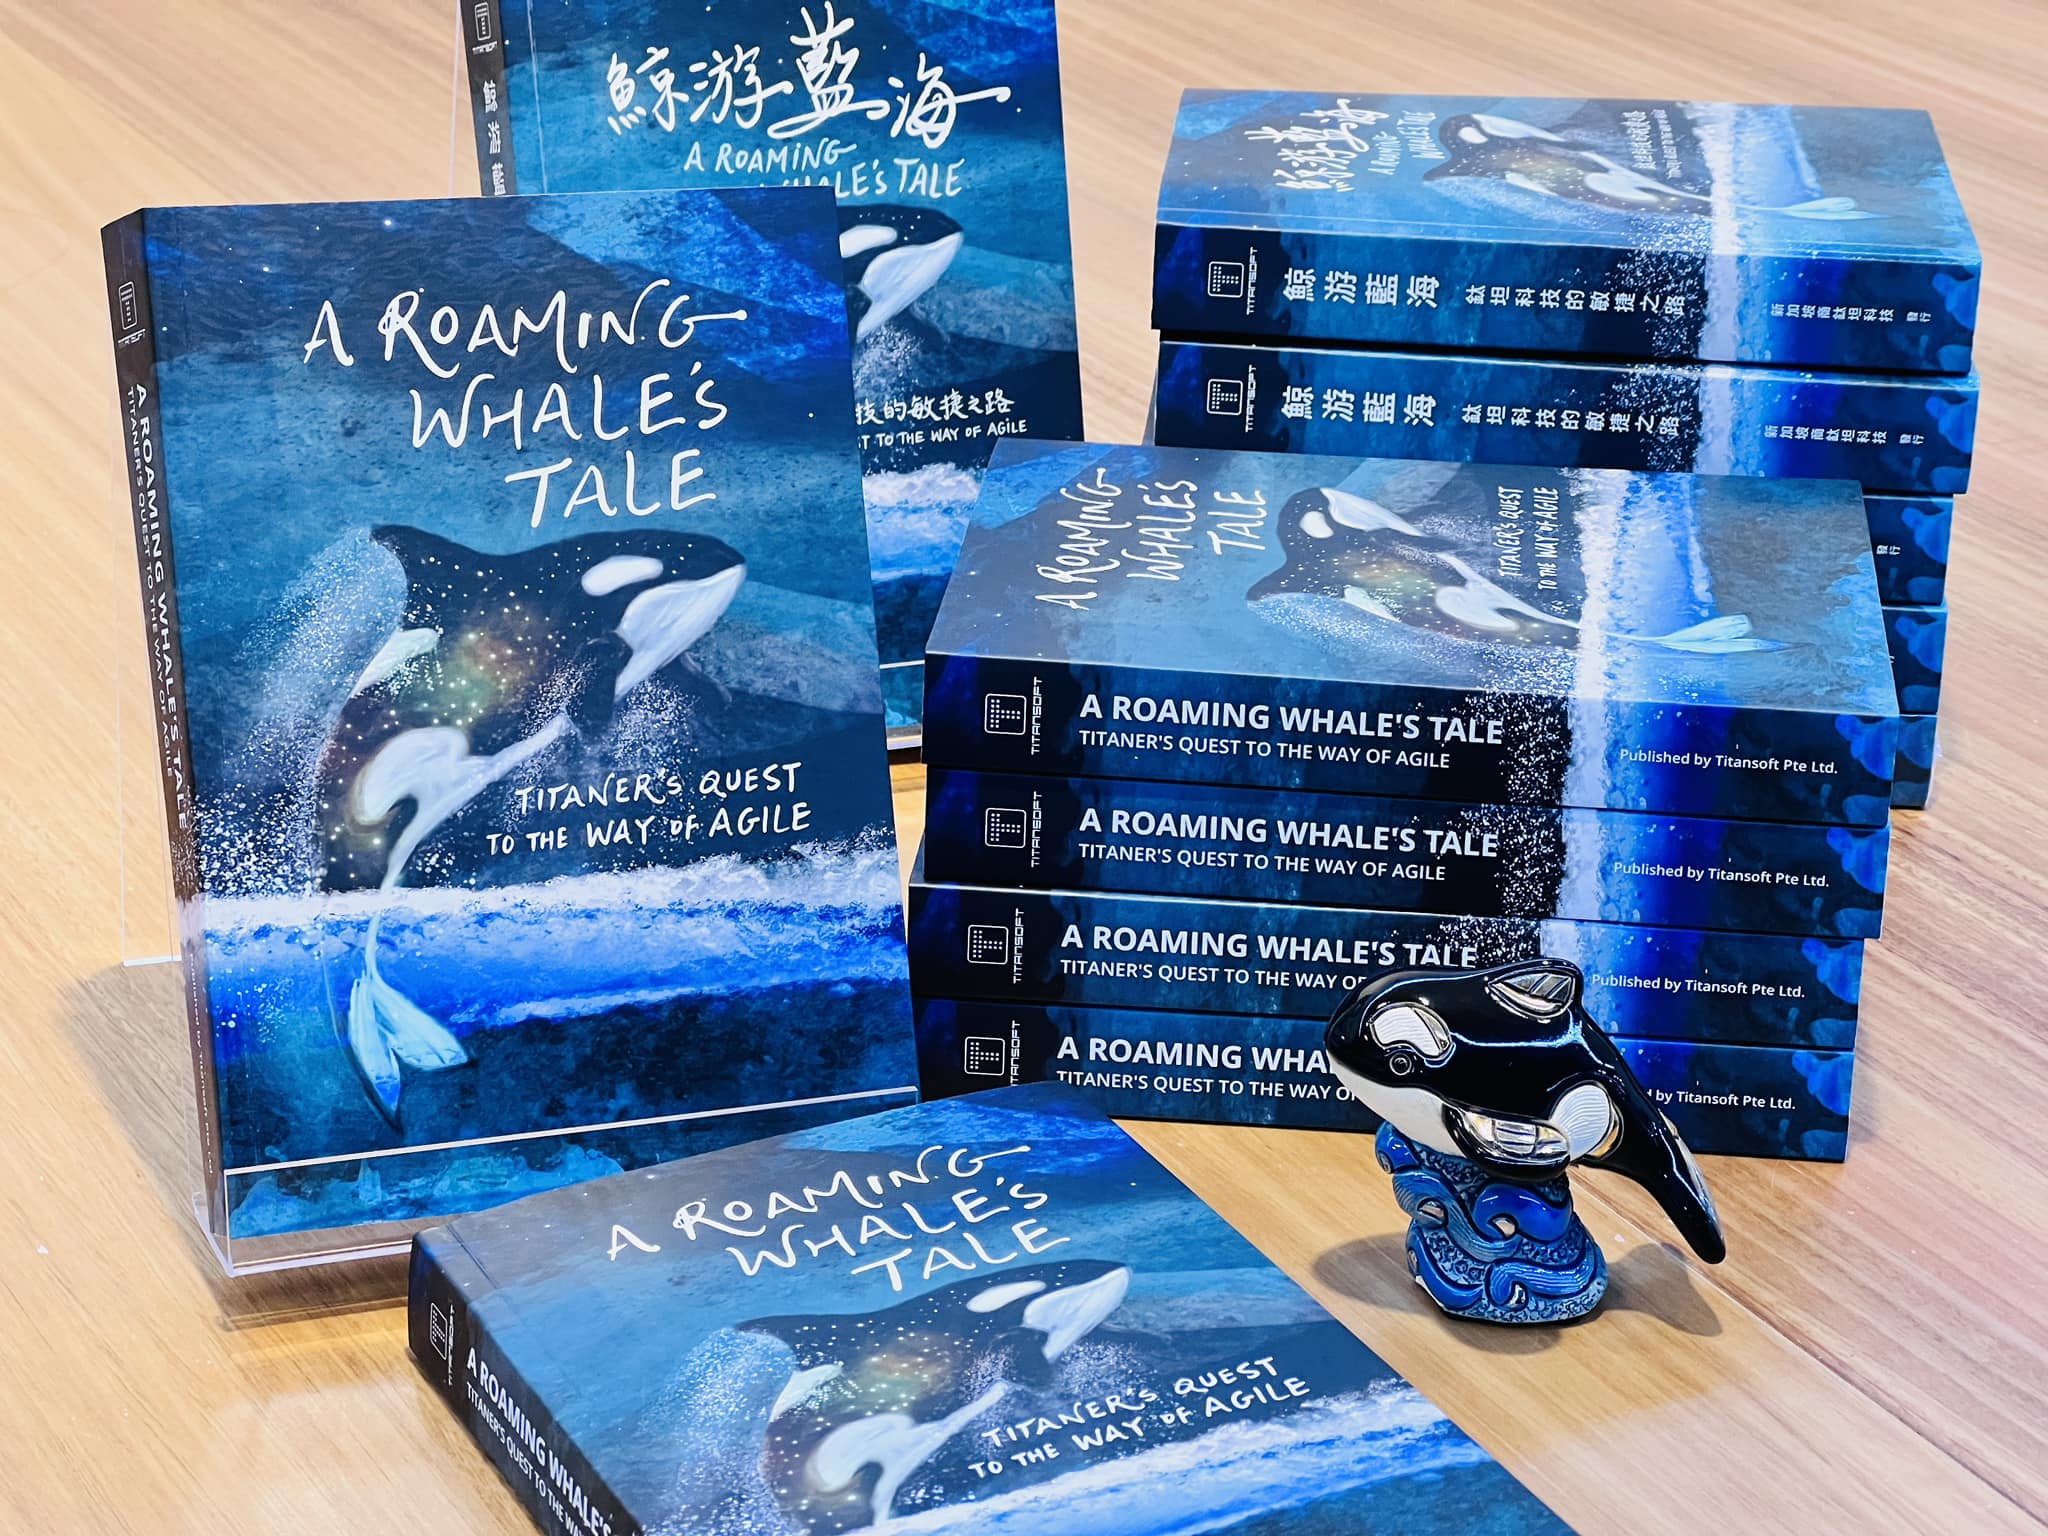 Titansoft published a book! "A Roaming Whale's Tale - Titaner's Quest to the way of Agile" invites you to explore the story of organizational transformation.